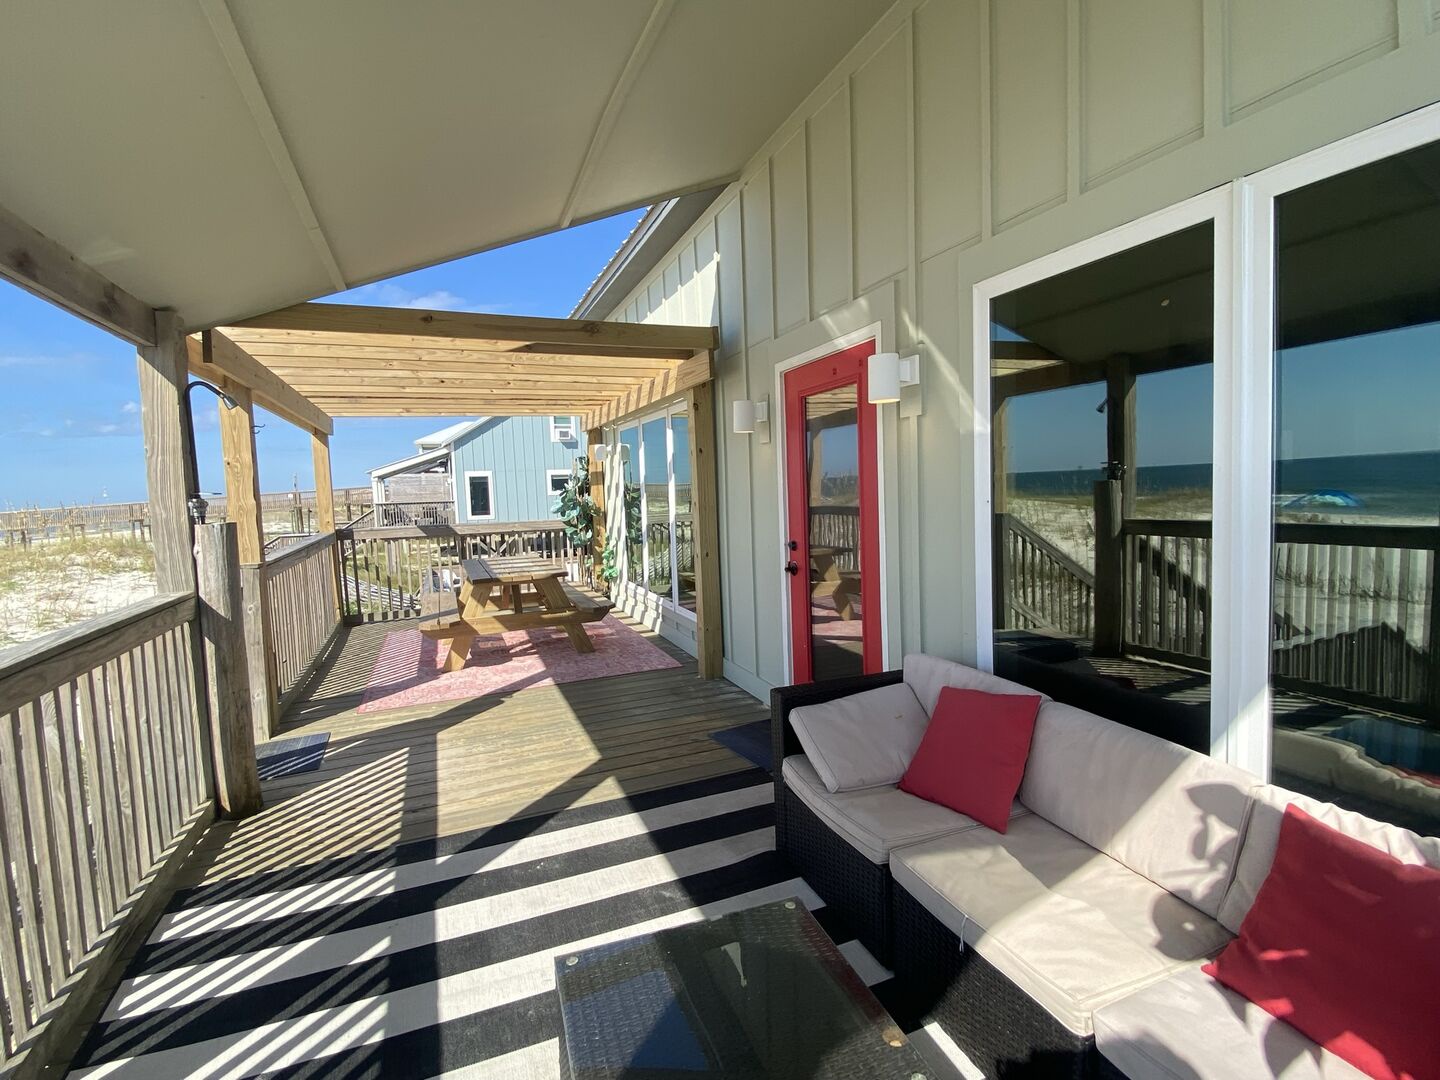 Wings has a wonderful pergola as well as covered porch area facing the Gulf